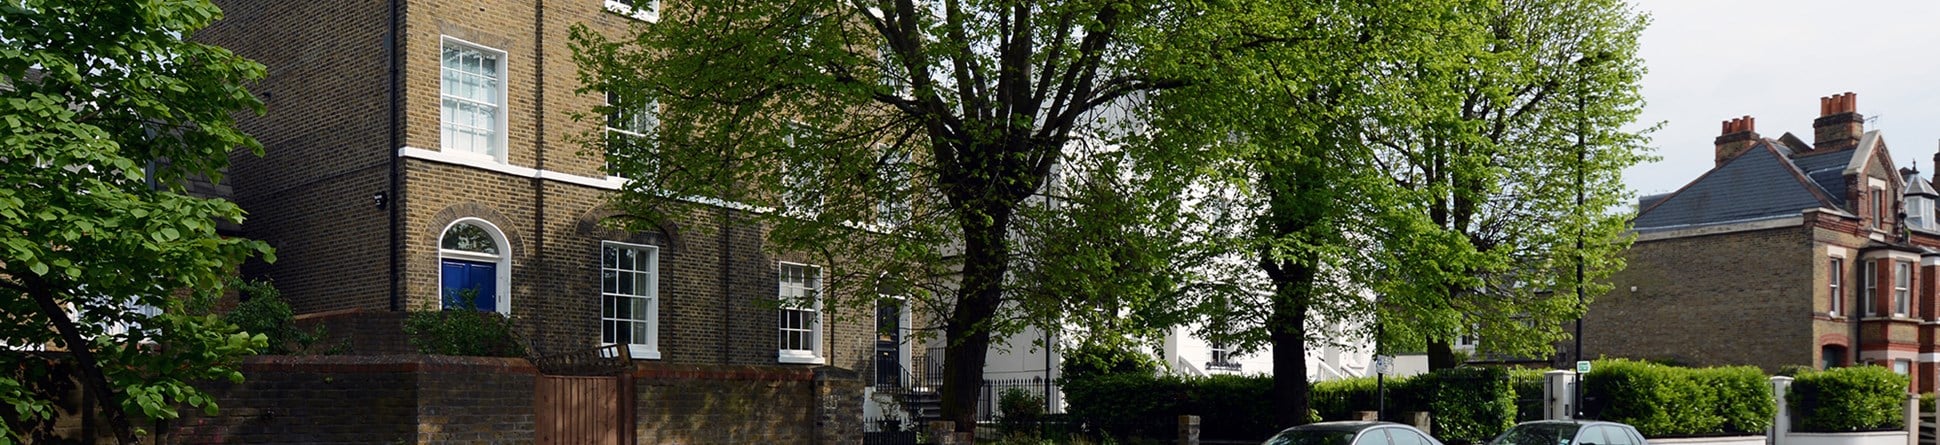 Photo of a Georgian 4 storey terraced house in London (view from the across the street) with a brick wall and large green tree in front